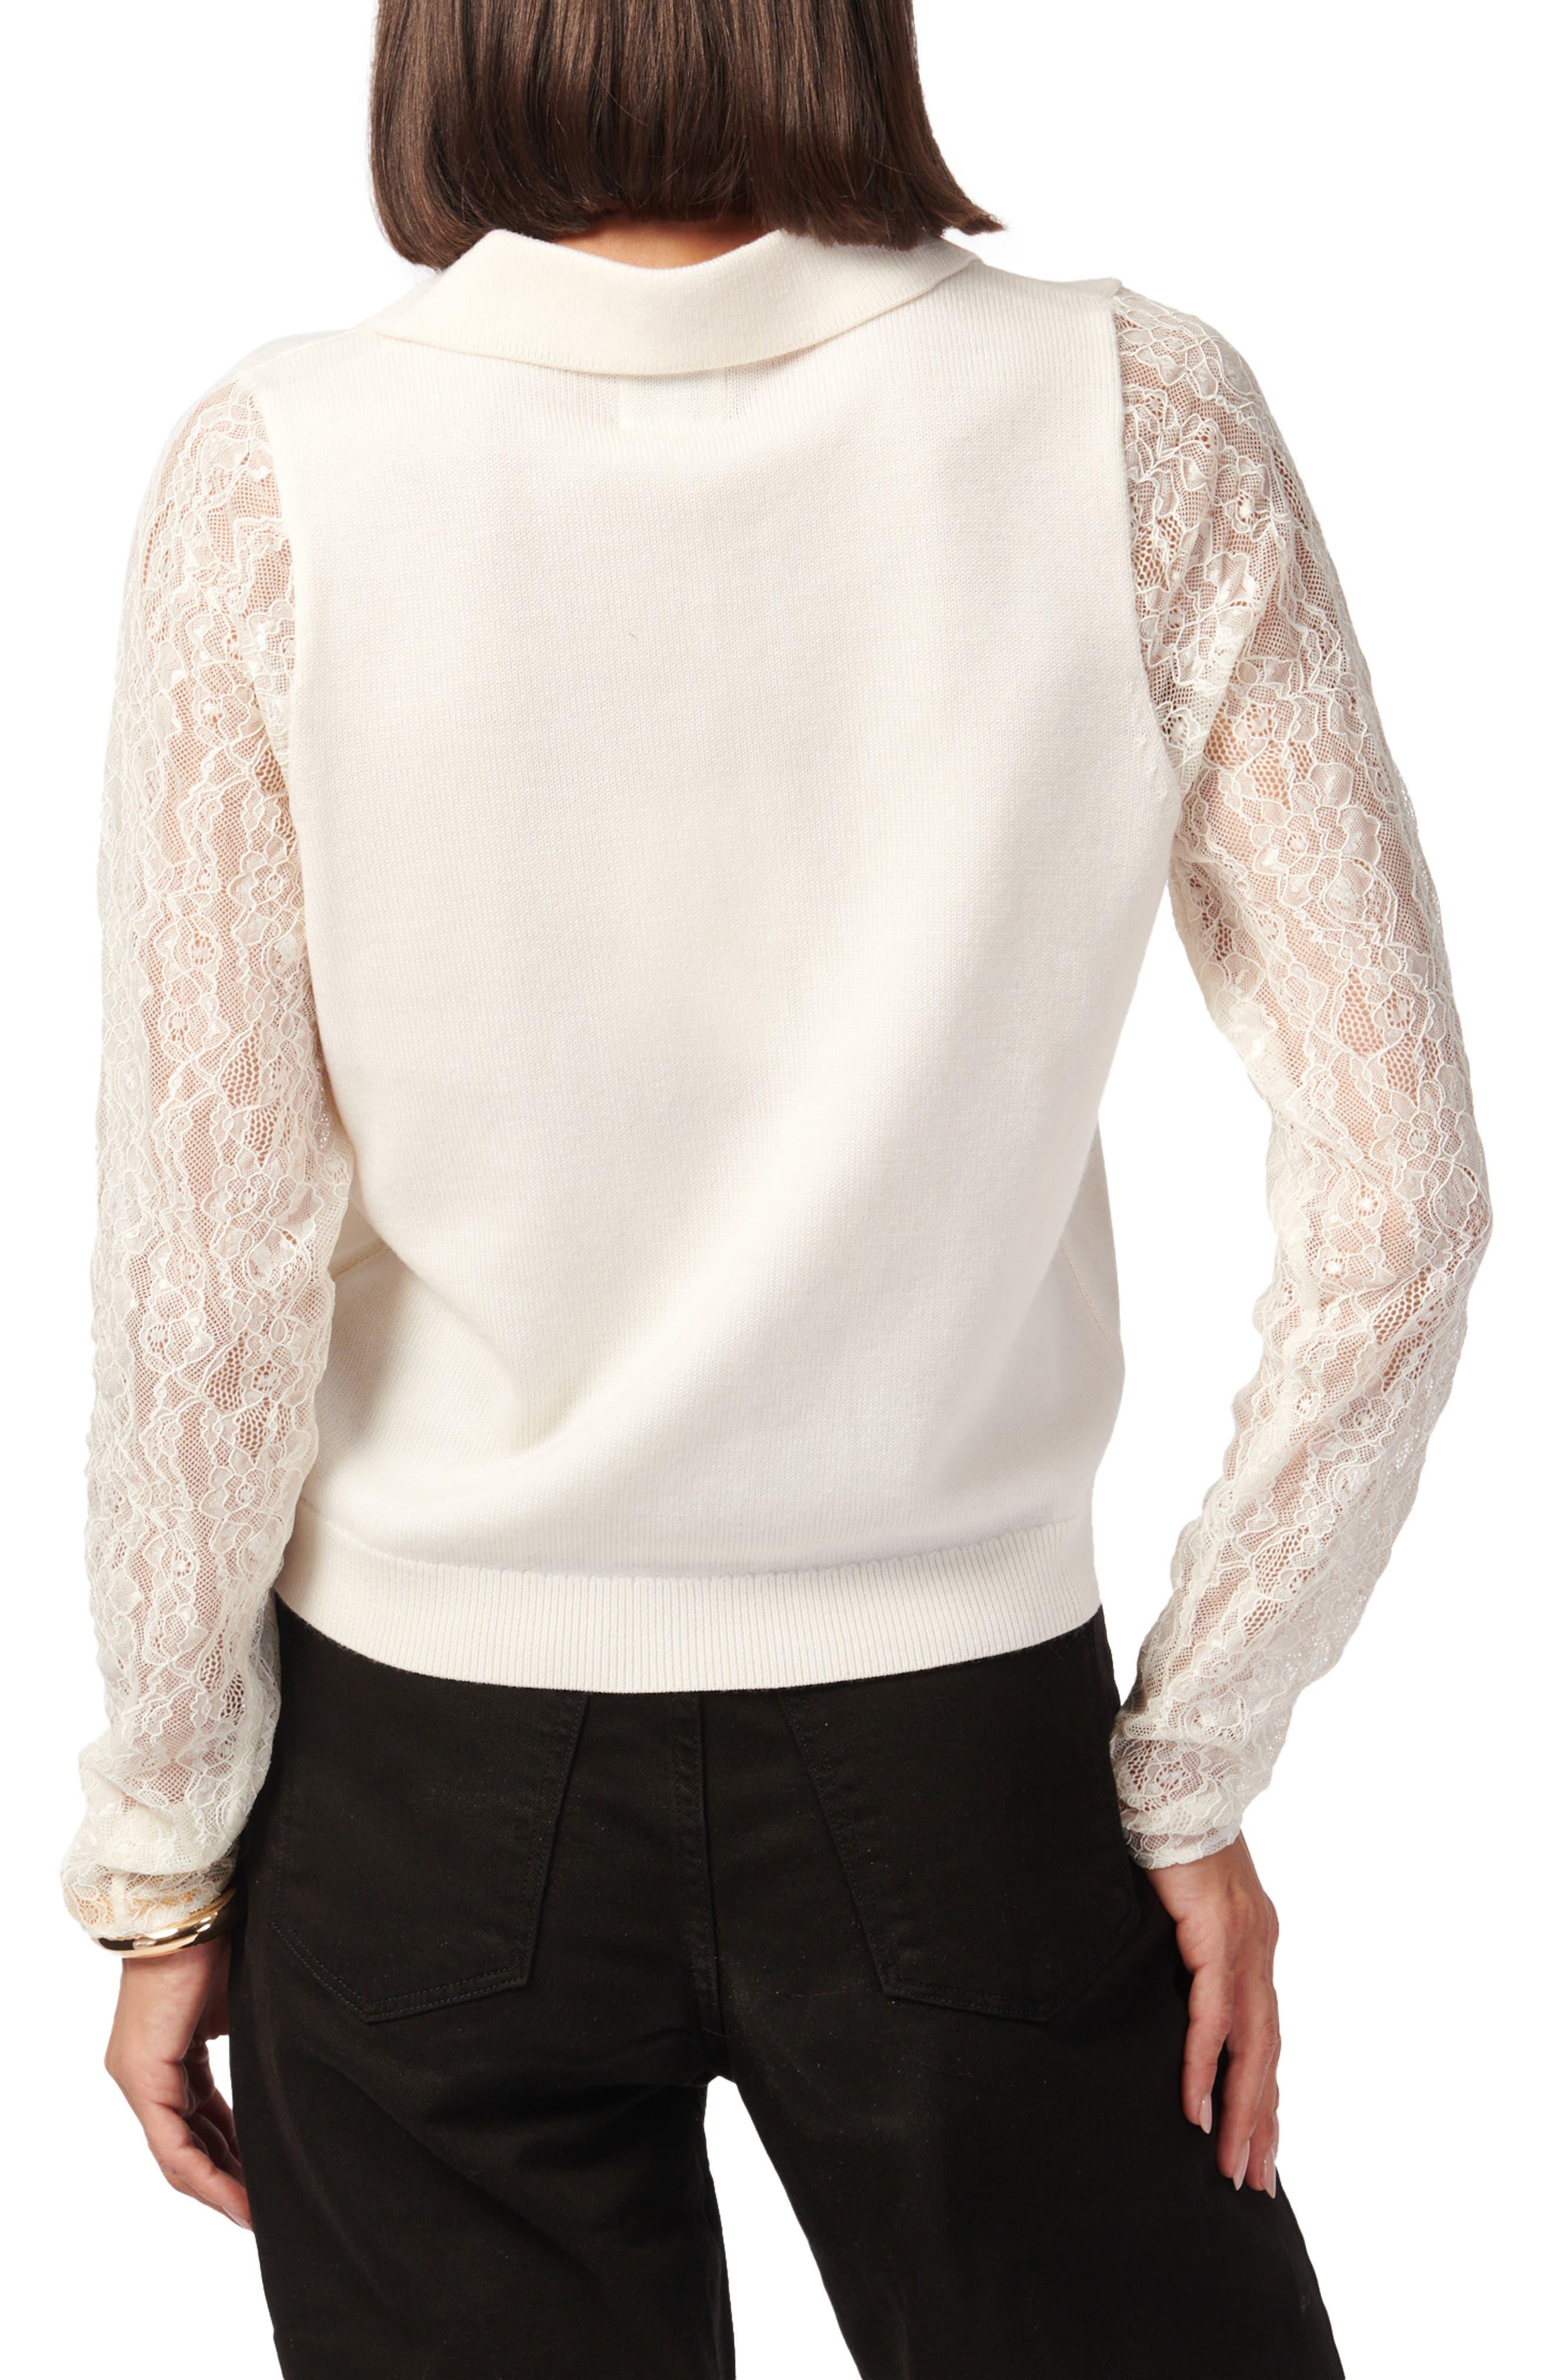 Cami NYC Priscilla Lace Sleeve Cardigan in White